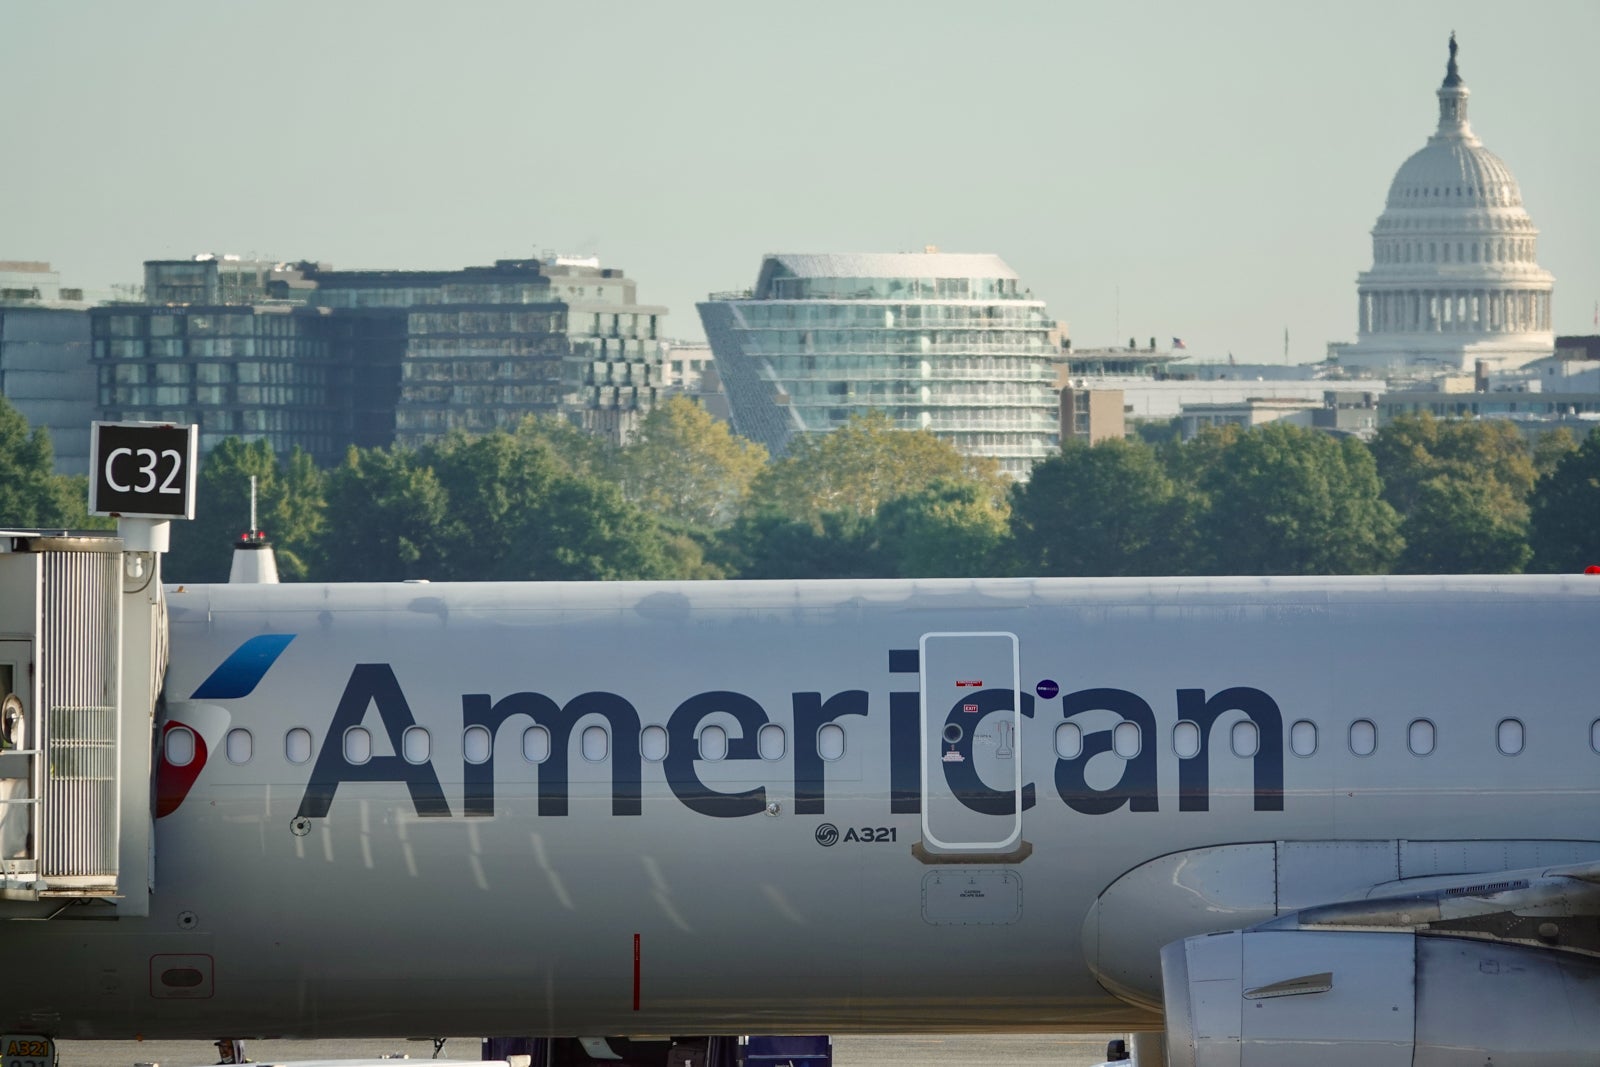 American adds 2 new routes from its Washington hub